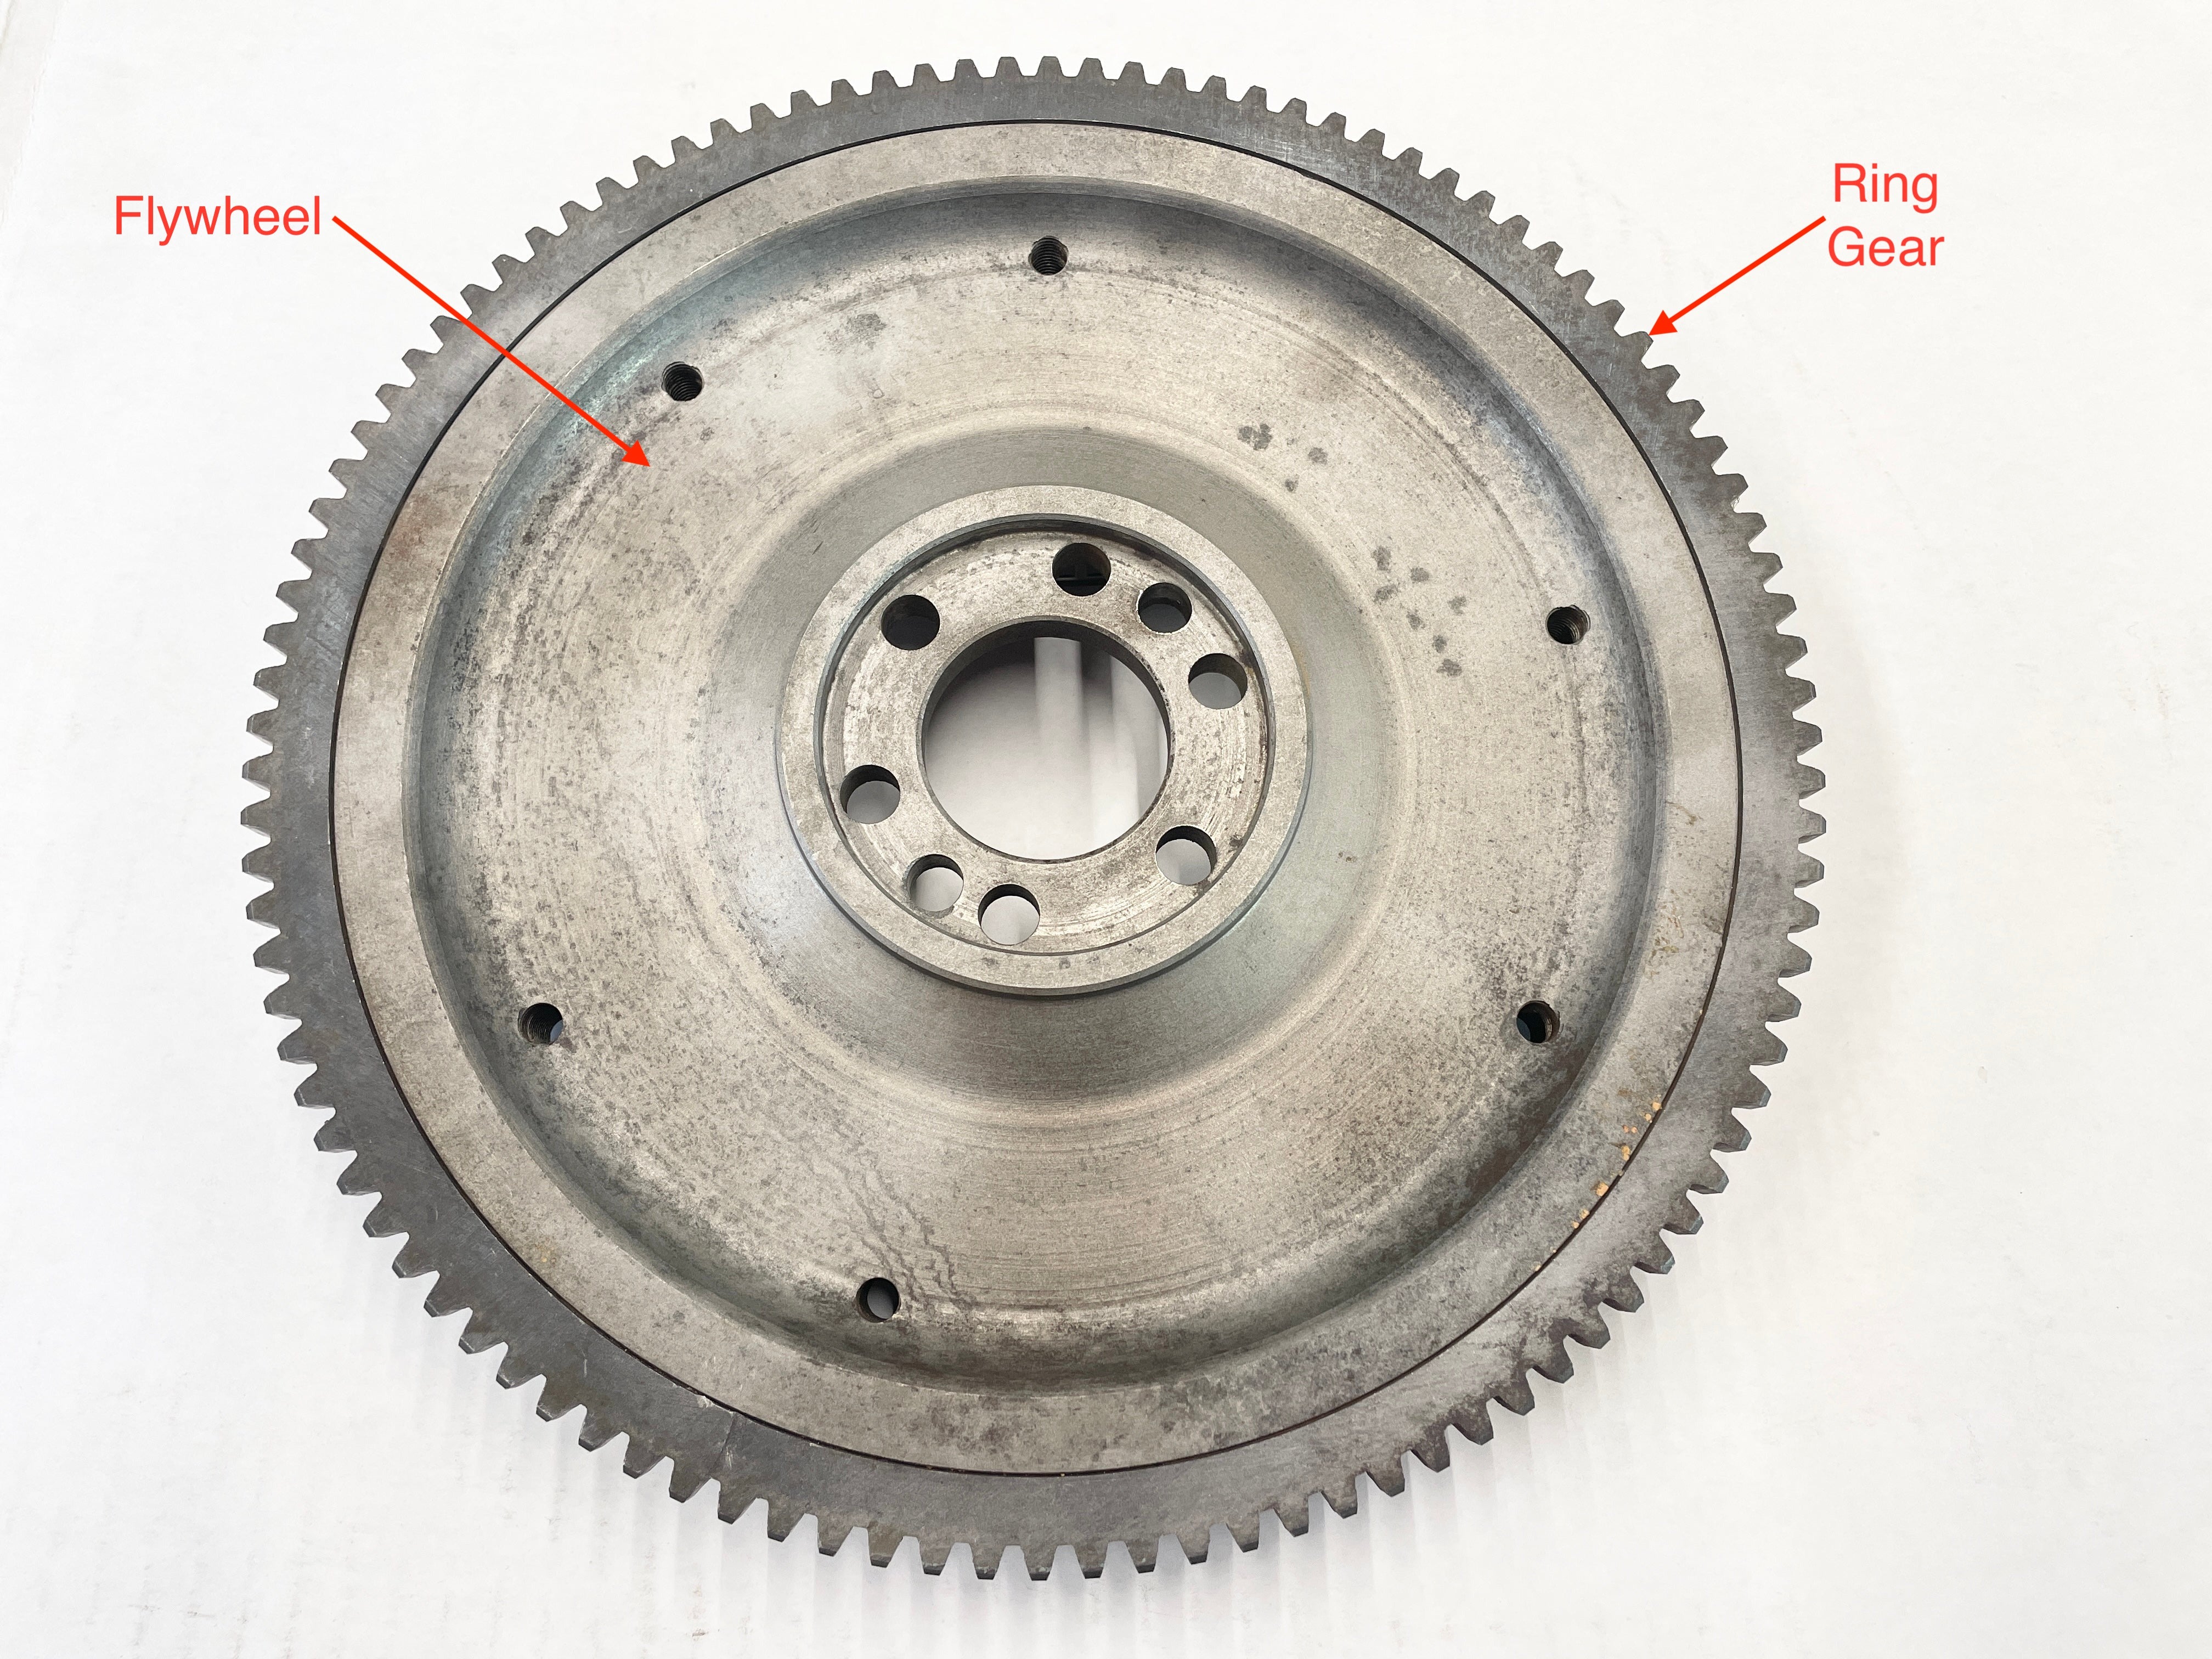 Flywheel Ring Gear, 129 Tooth - Midwest Military Store